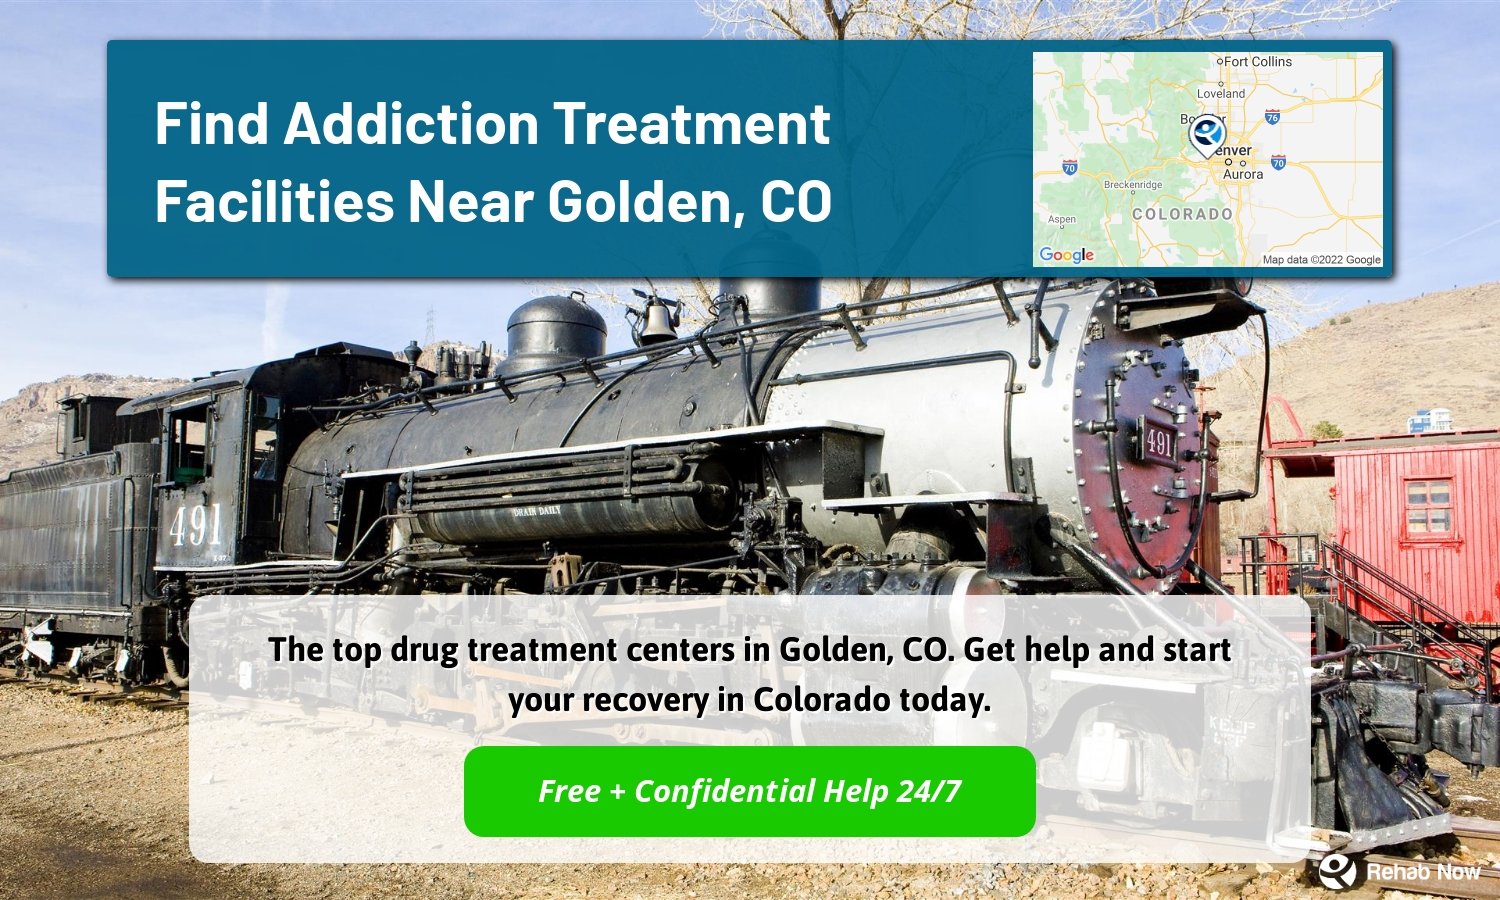 The top drug treatment centers in Golden, CO. Get help and start your recovery in Colorado today.